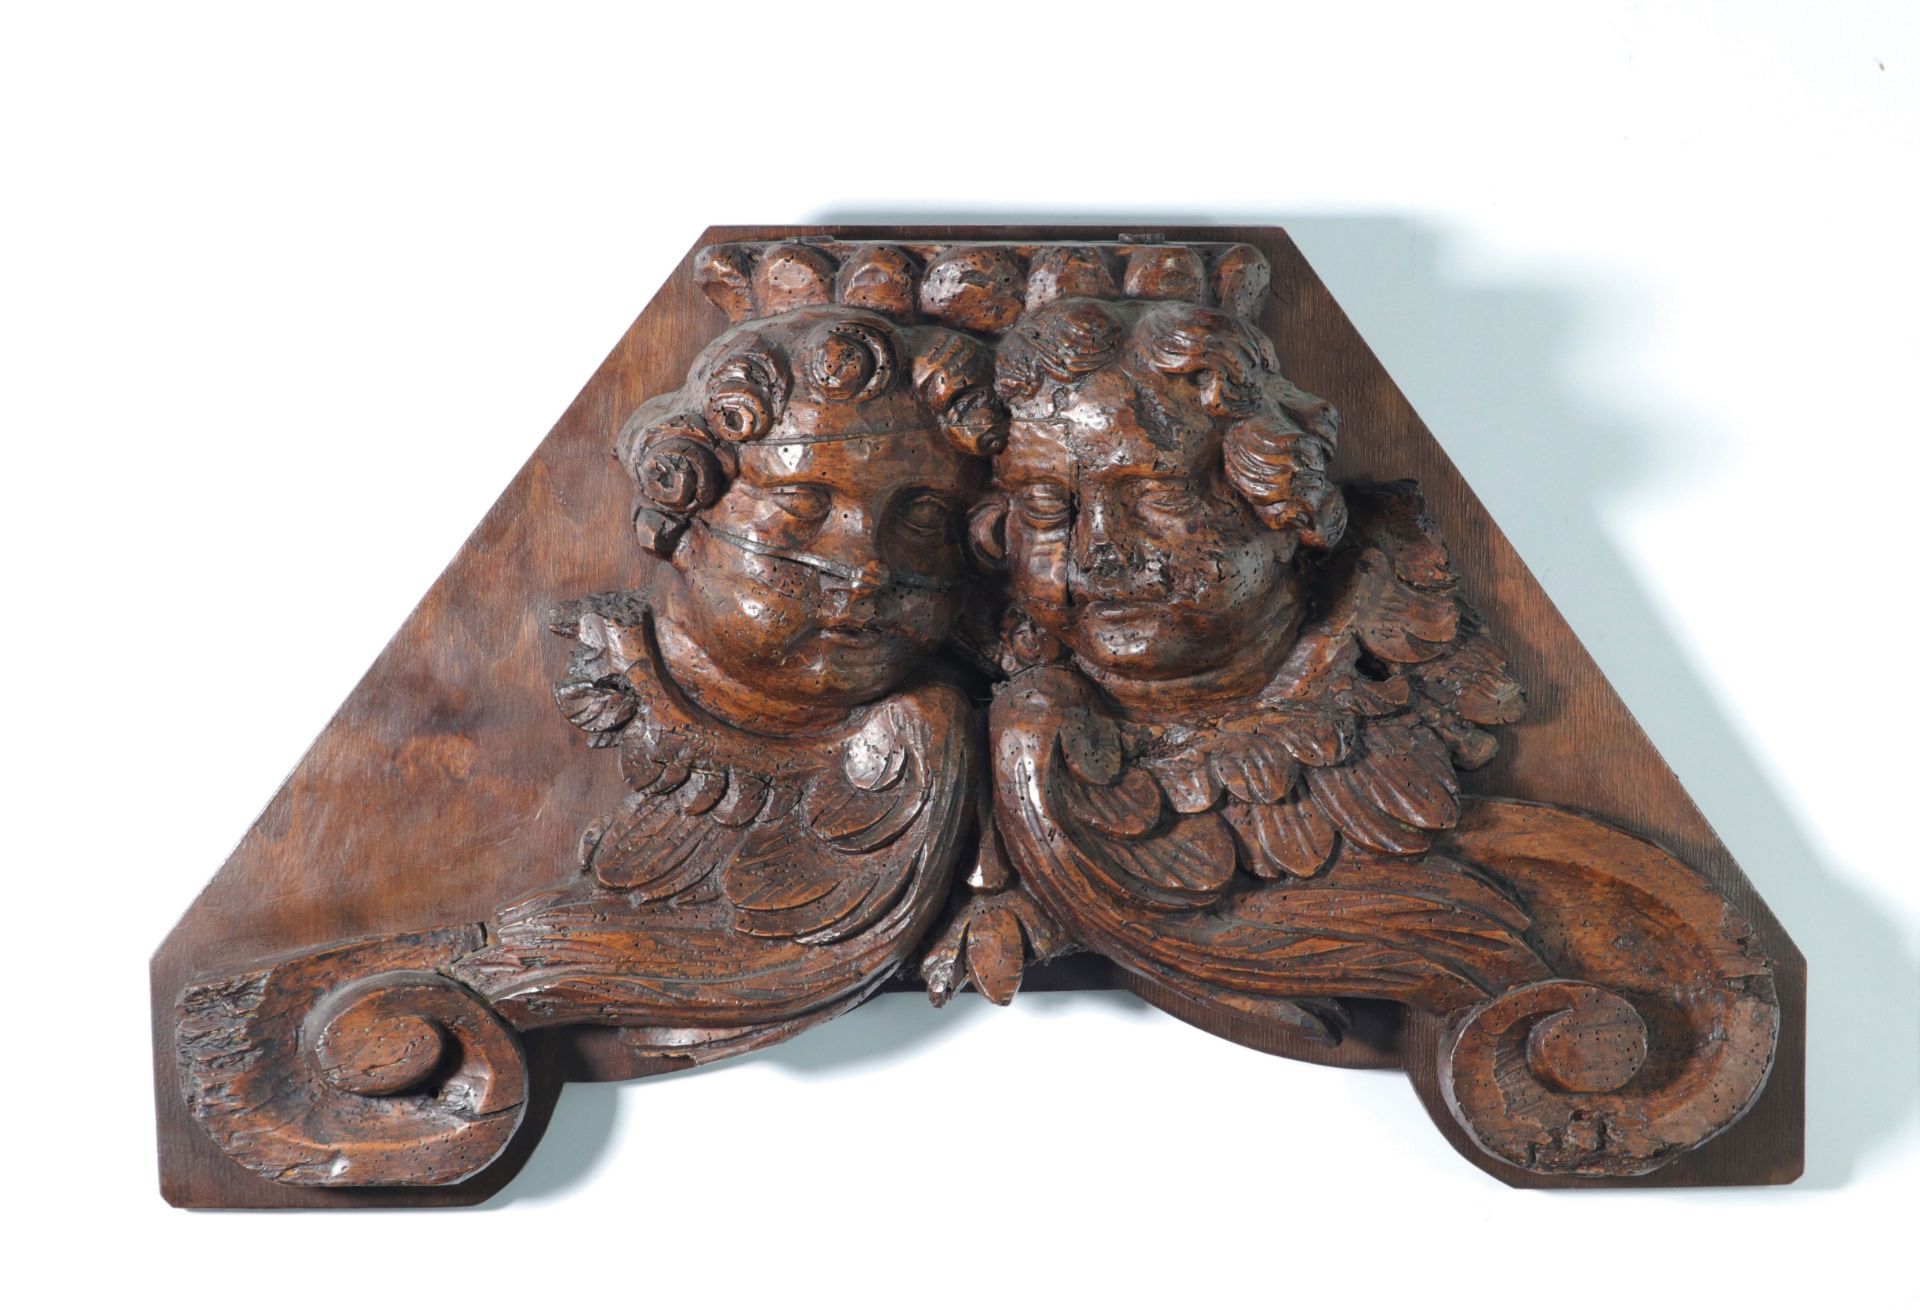 18th century wood paneling carved with angels' faces.